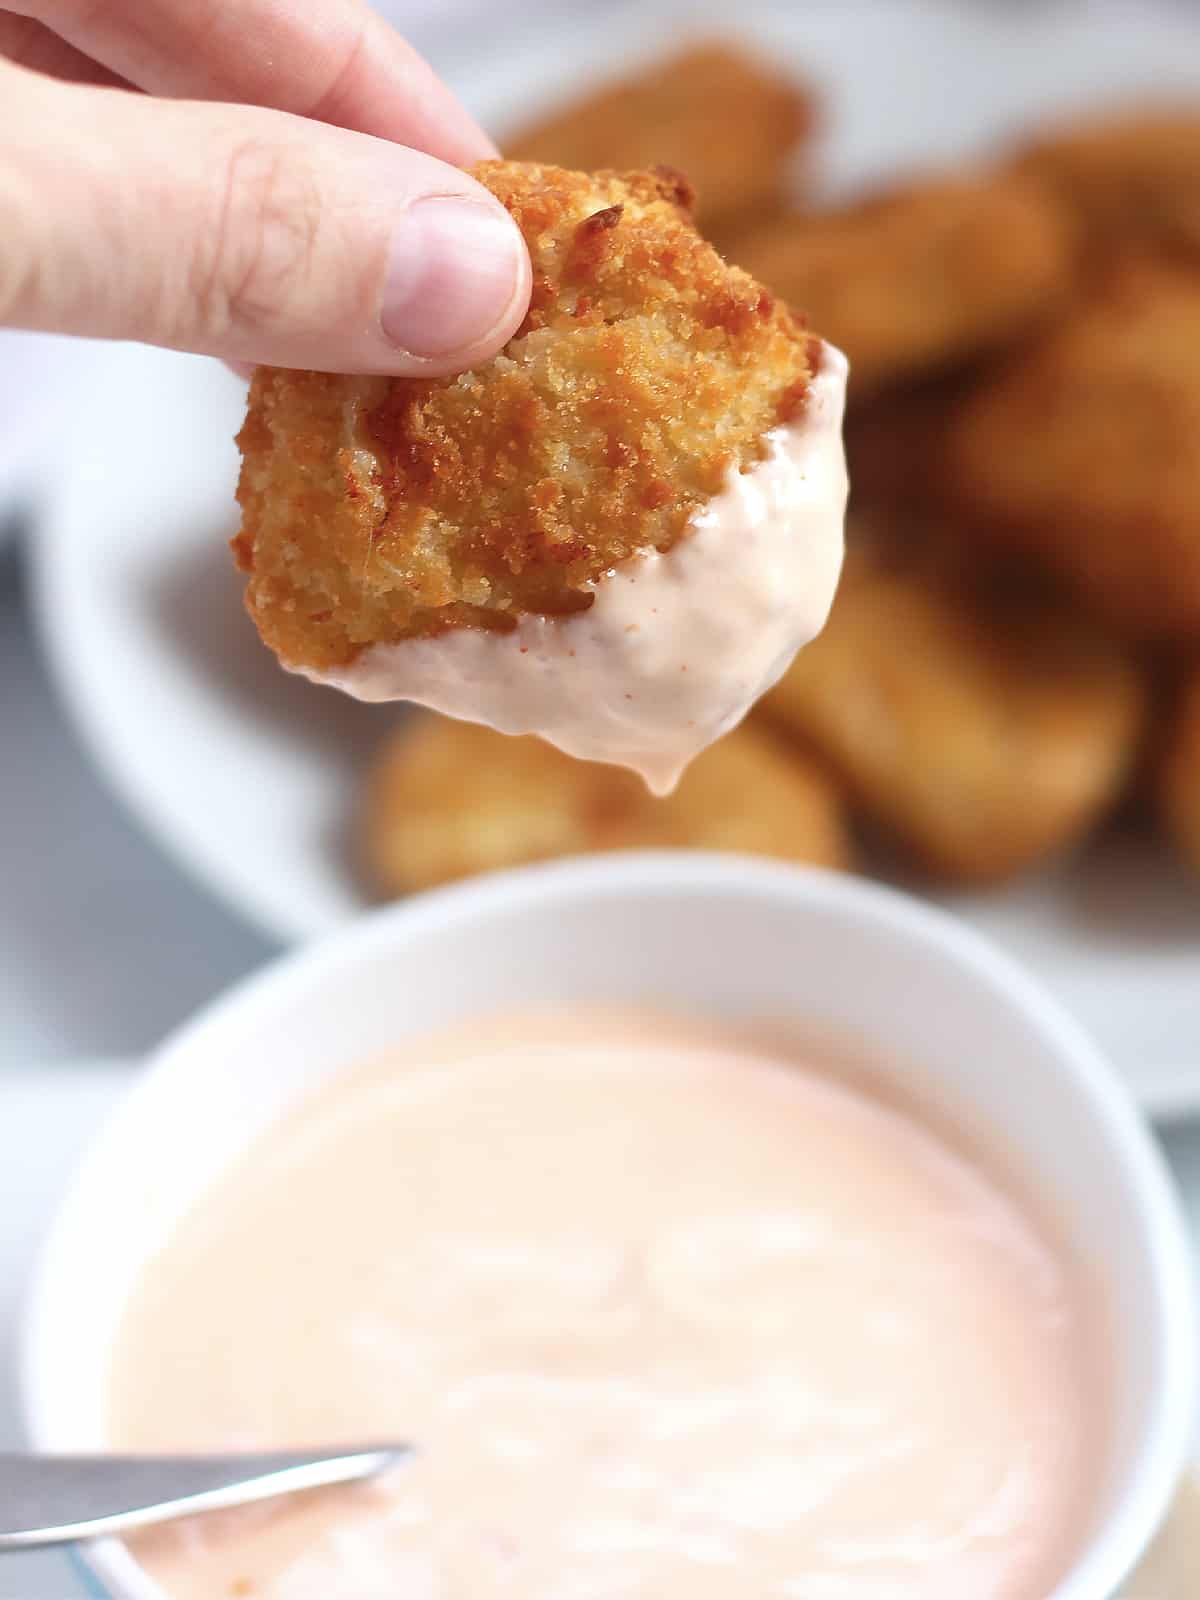 A chicken nugget being dipped into a sauce.